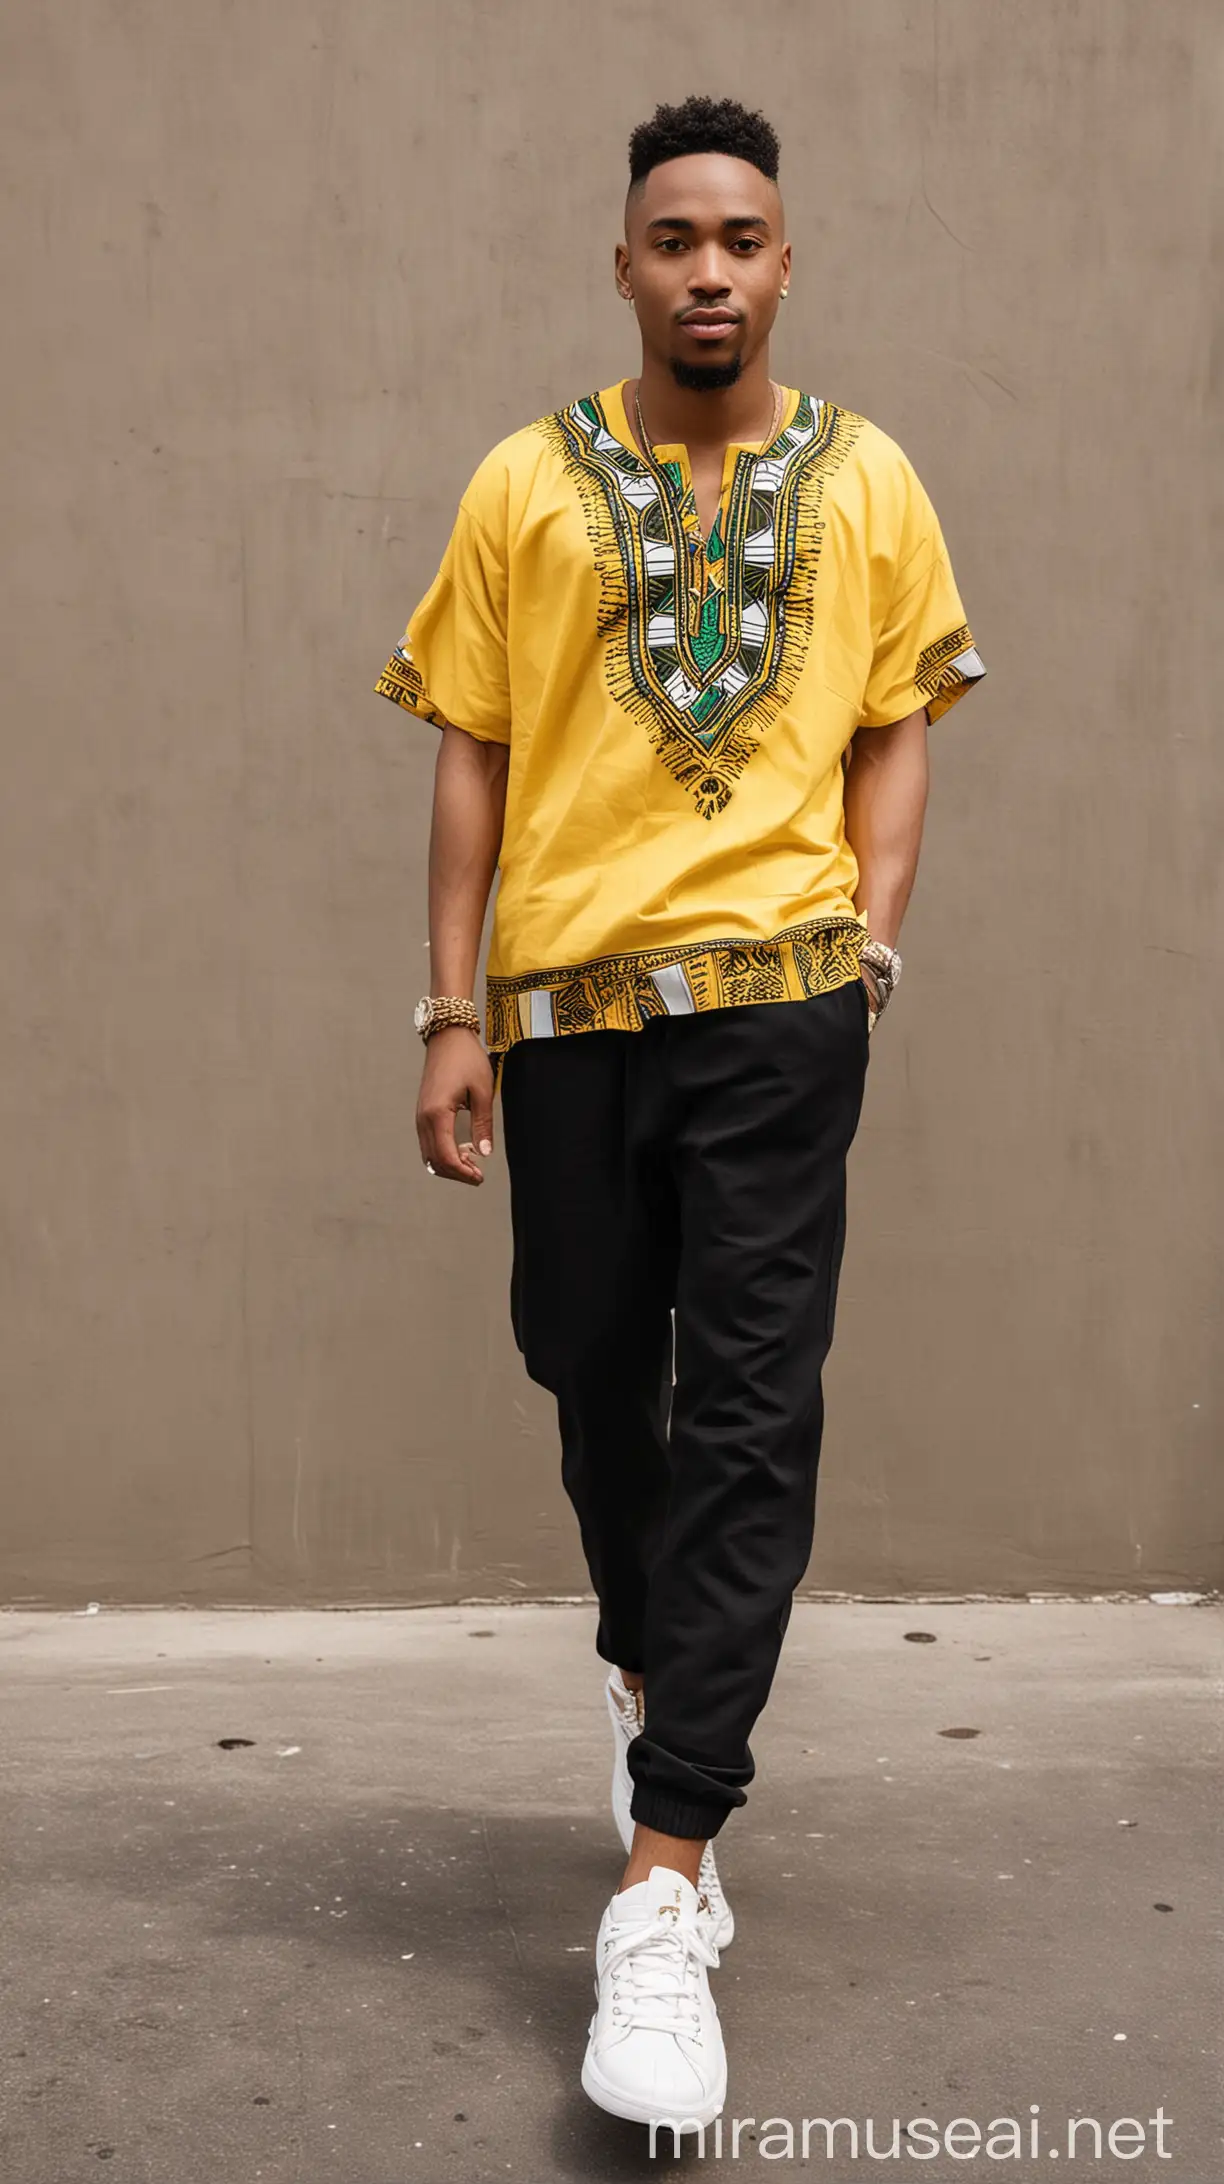 African Man in Yellow Dashiki Shirt and Black Pants with White Sneakers